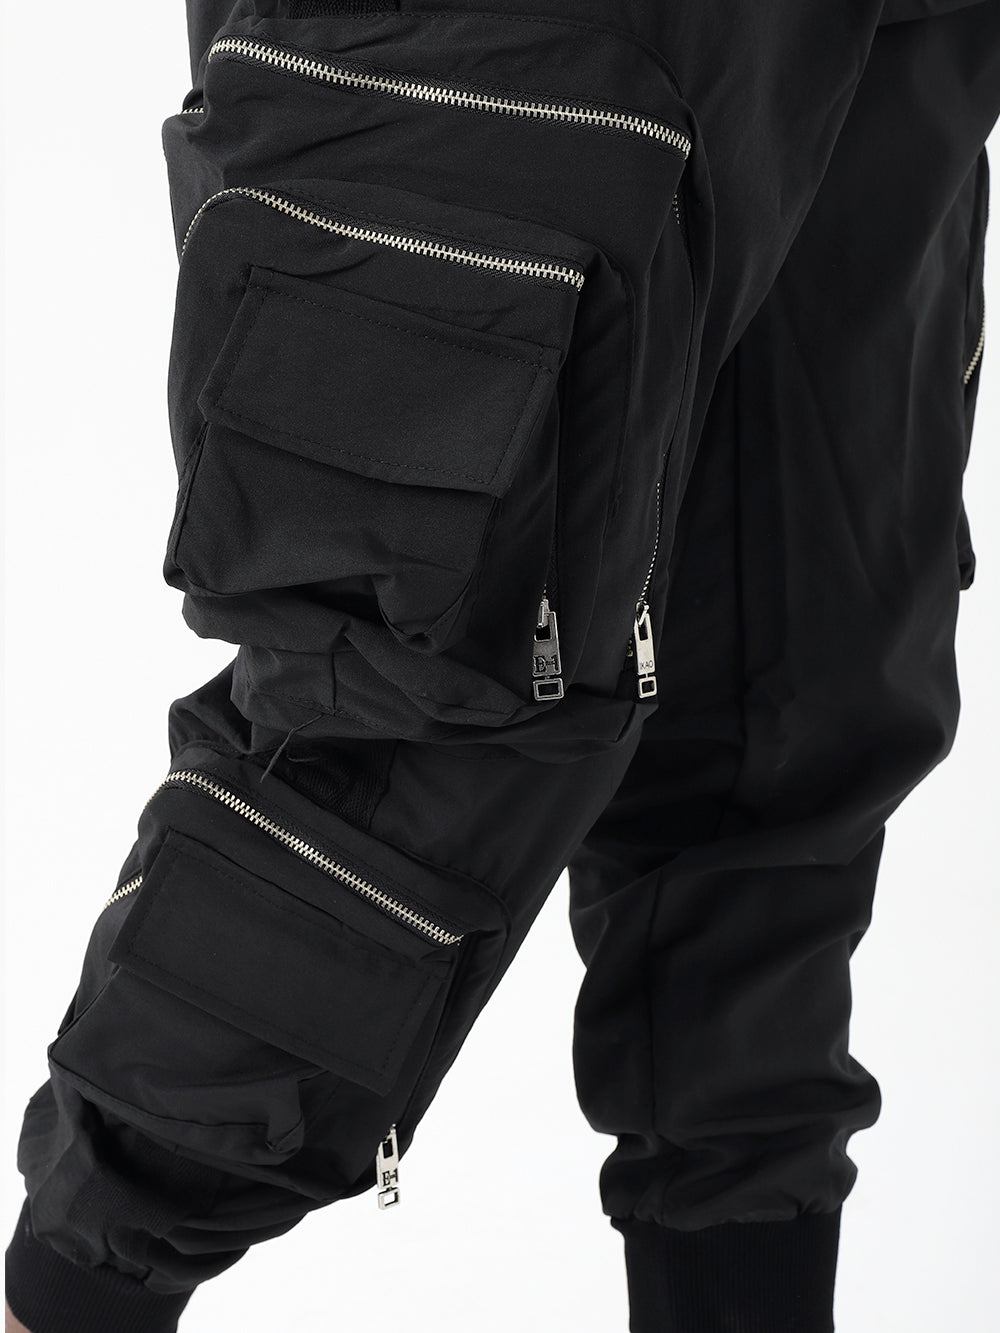 A man wearing LAVANO JOGGERS with zippered pockets.